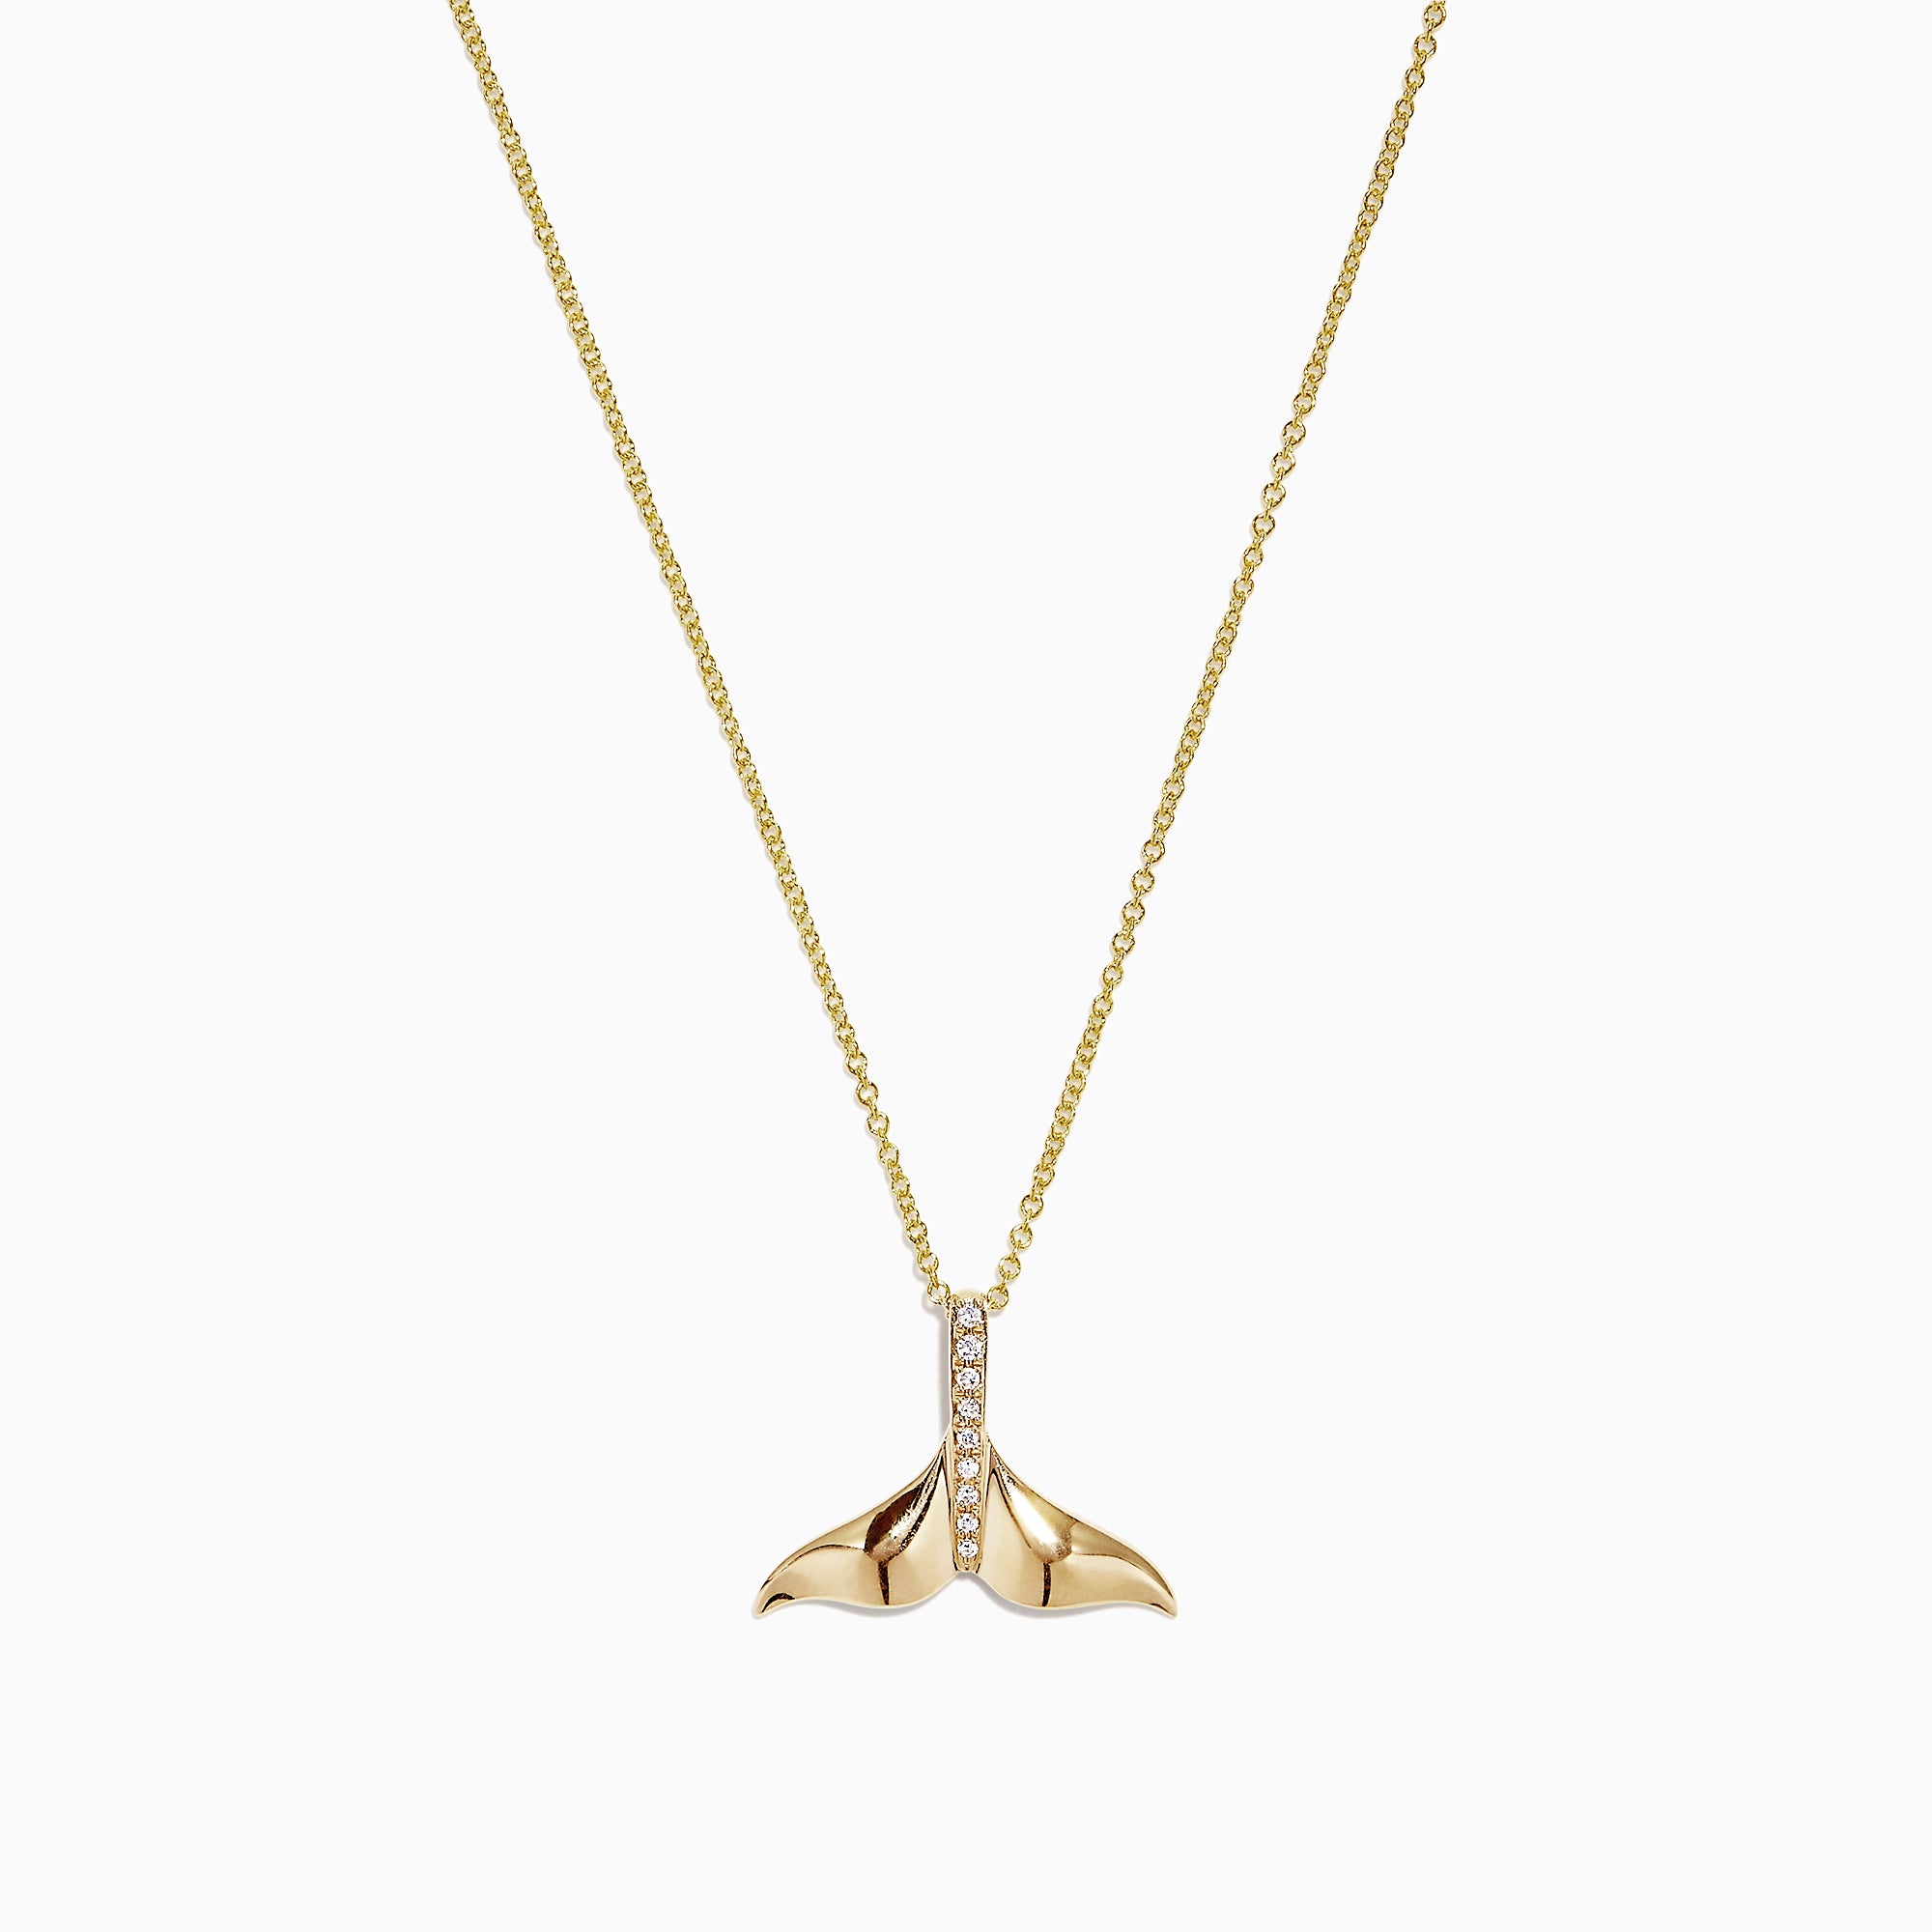 Whale Tail Necklace - Passport Ocean